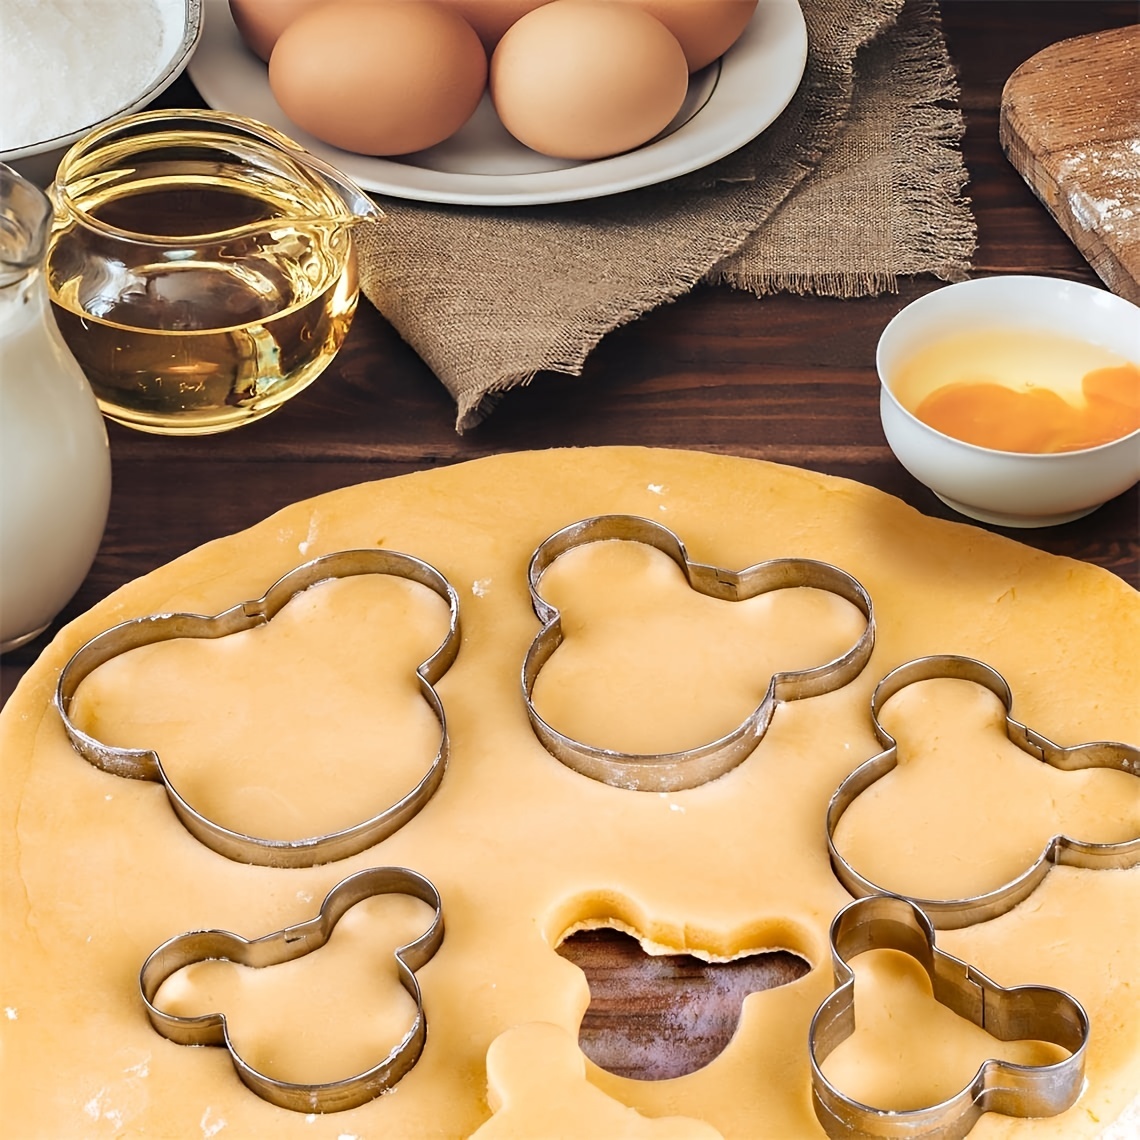 Heart-Shaped Cookie Biscuit Cutter Set 6 Valentine Pastry Donut Cutter Set Heart Cookie Cutters Baking Metal Ring MoldsValentine's Day Cookie Cutter